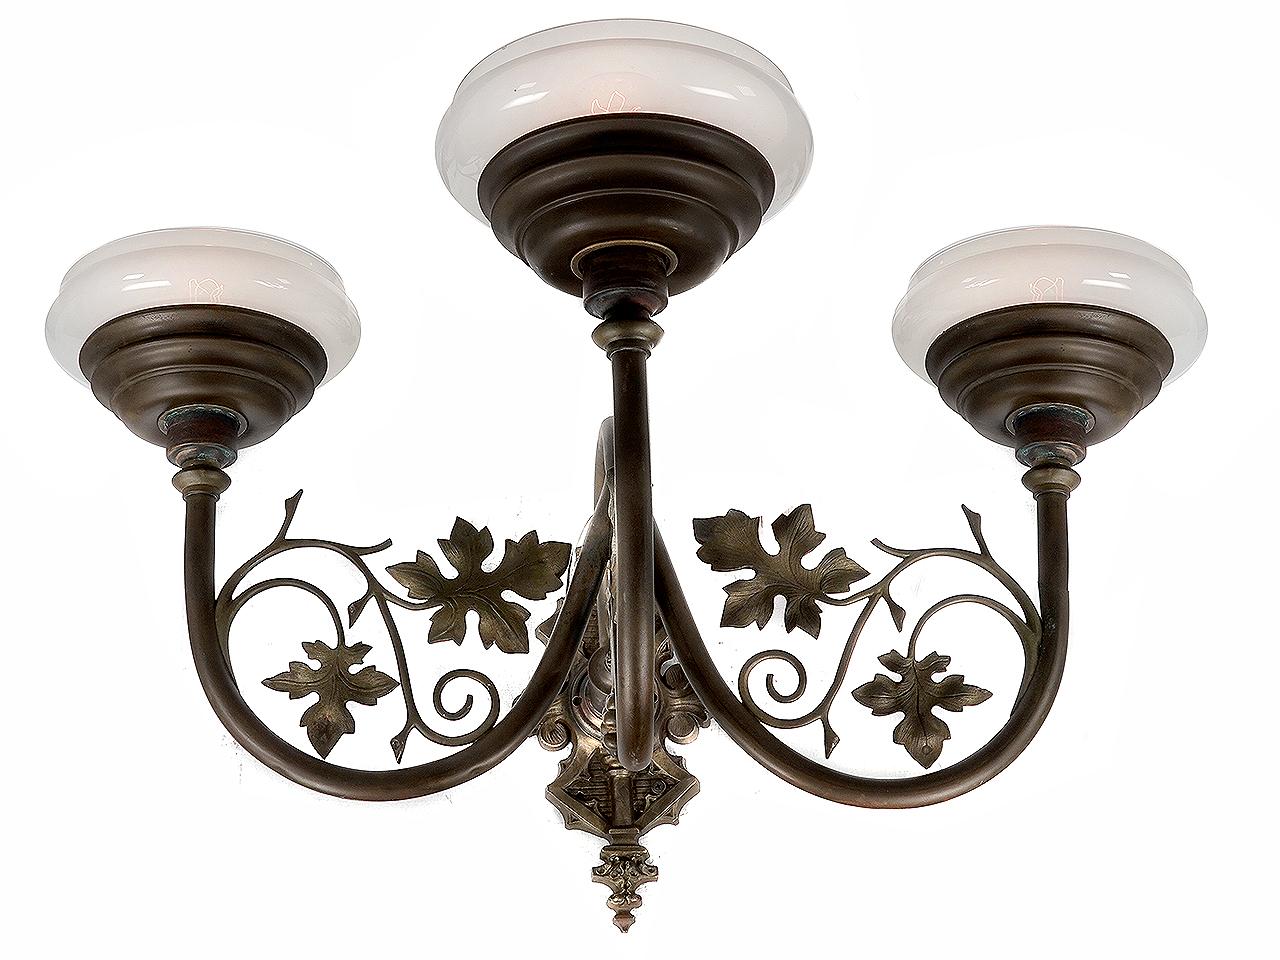 This is a large and impressive ornate sconce that makes a big statement. The Vaseline glass has a nice mellow grapefruit color and the hand blown glass is light and delicate. The metal is an intricate combination of curved tubing and floral work.